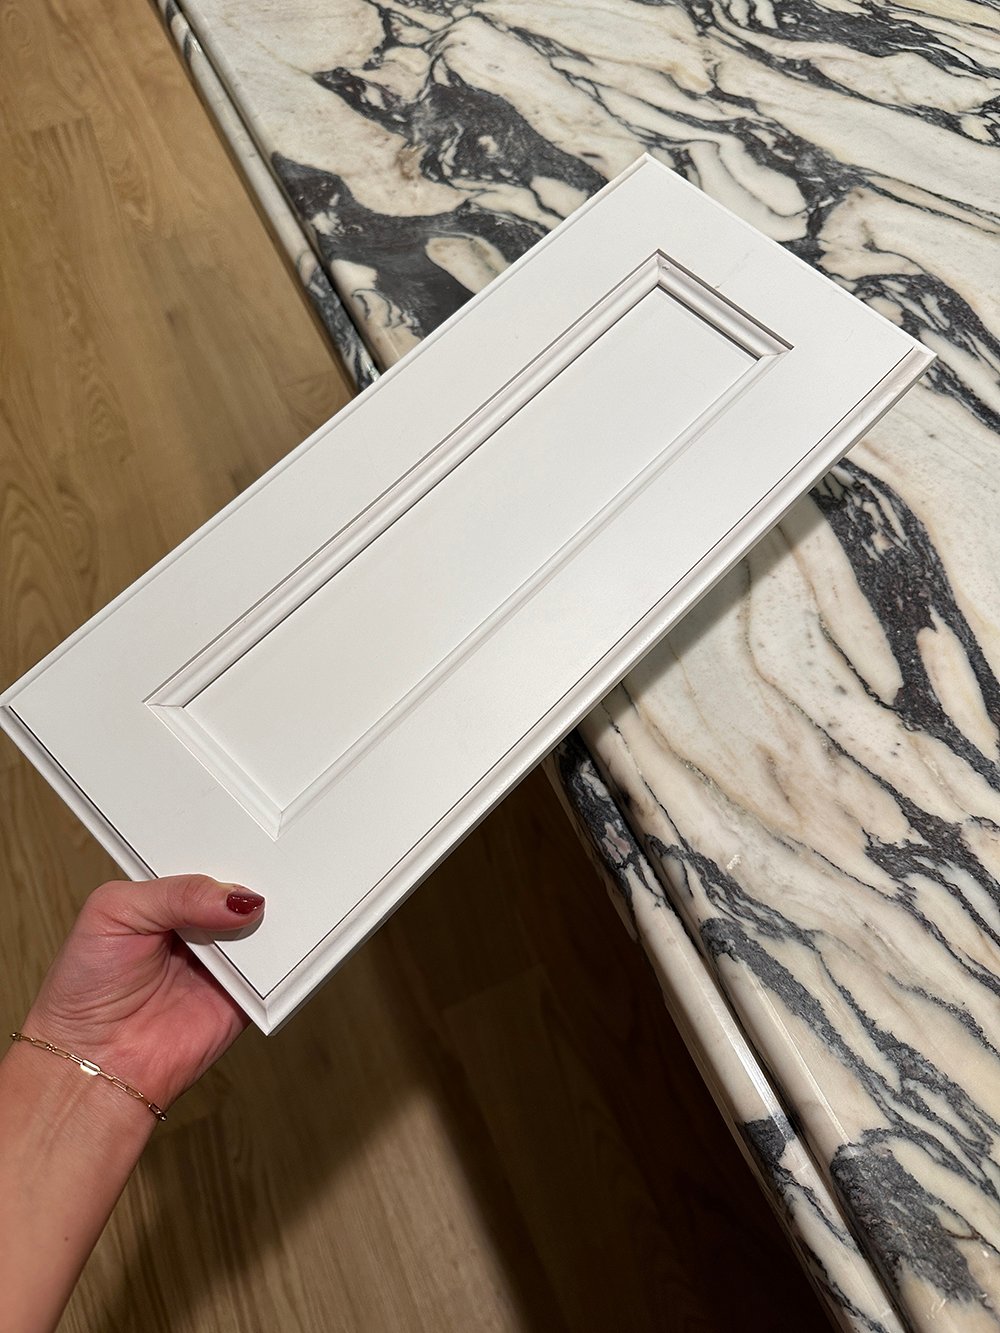 How to Replace & Upgrade Your Cabinet Doors - roomfortuesday.com